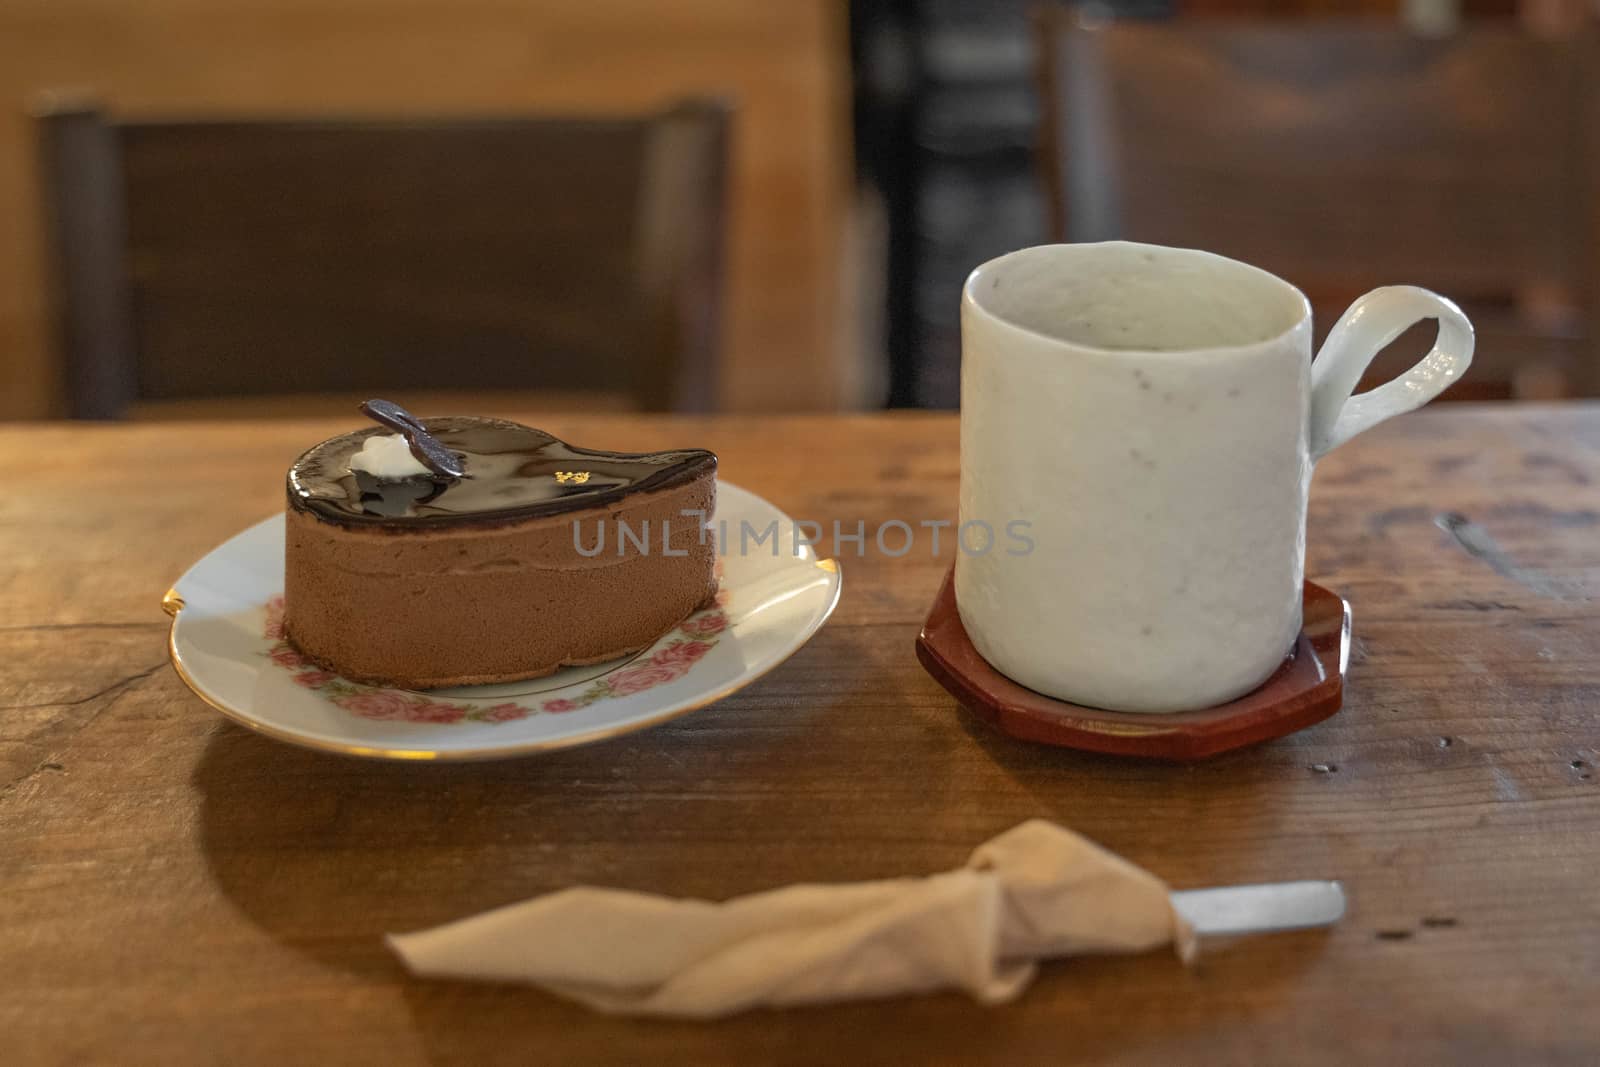 Cake and cup of coffee on wooden table by uphotopia